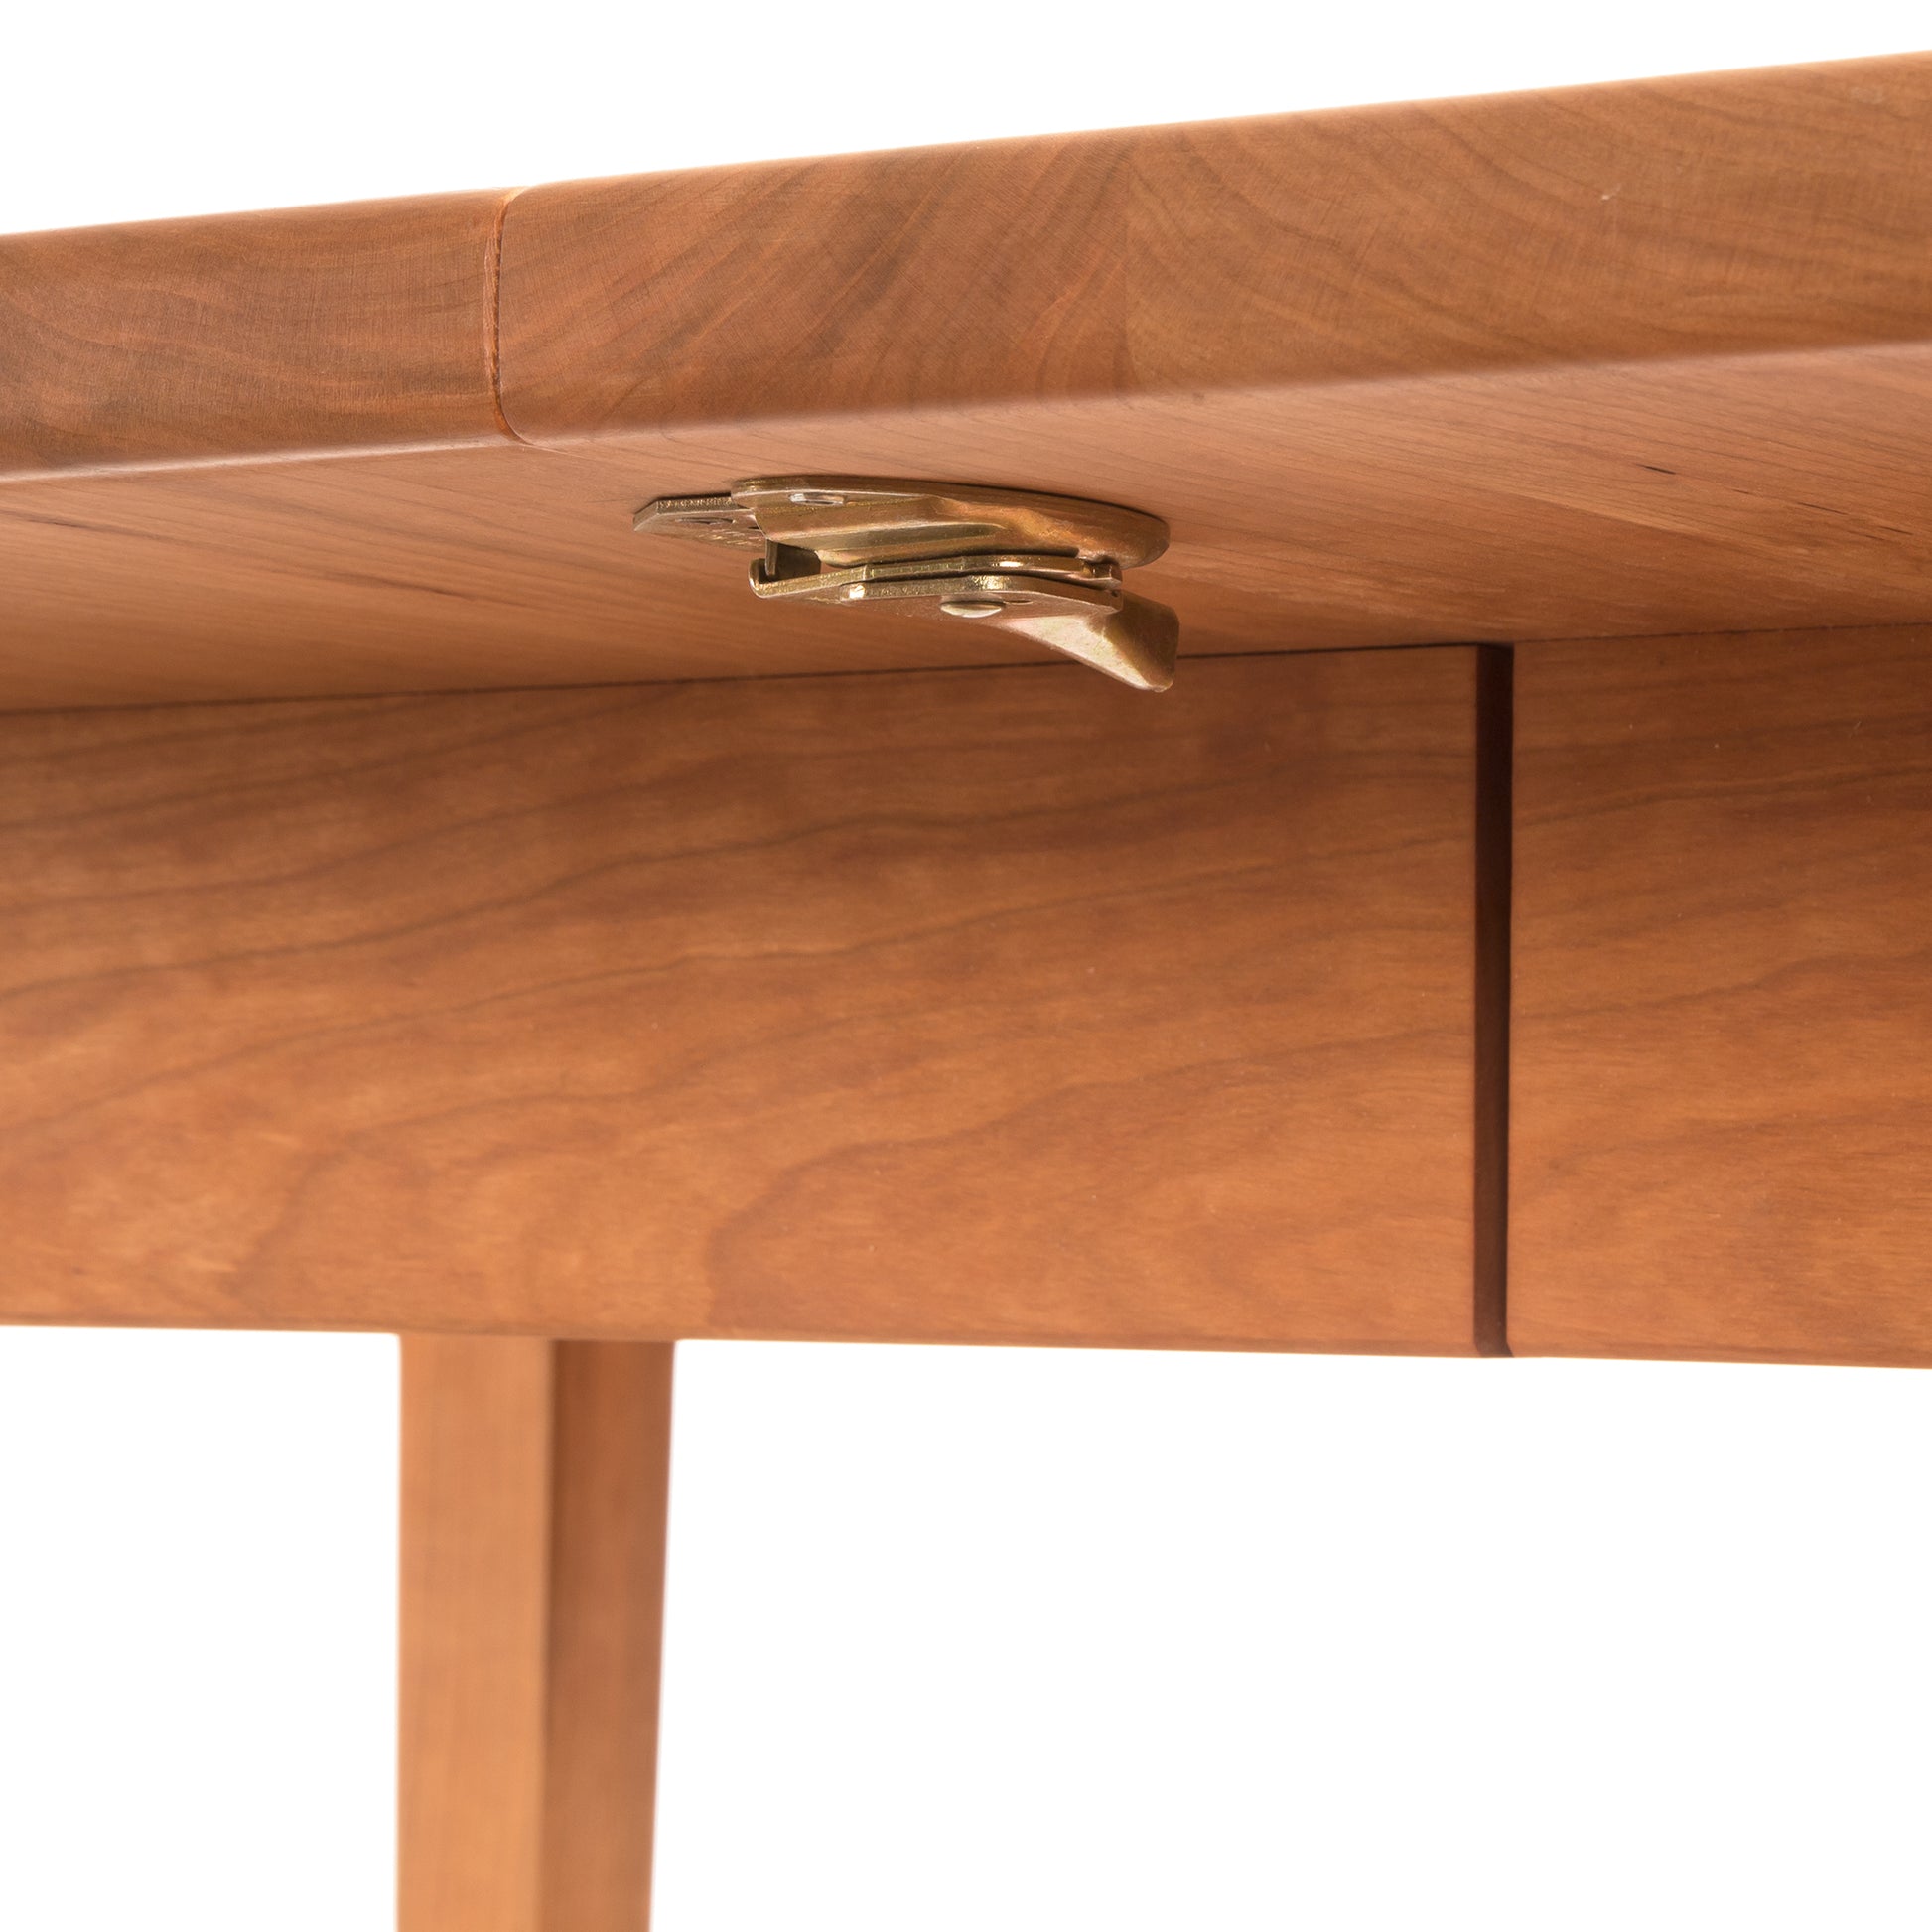 Close-up of a Maple Corner Woodworks Vermont Shaker Oval Extension Dining Table with an open drawer, showcasing the metallic drawer handle attached beneath the tabletop. The wood has a warm, reddish-brown hue with a smooth finish.